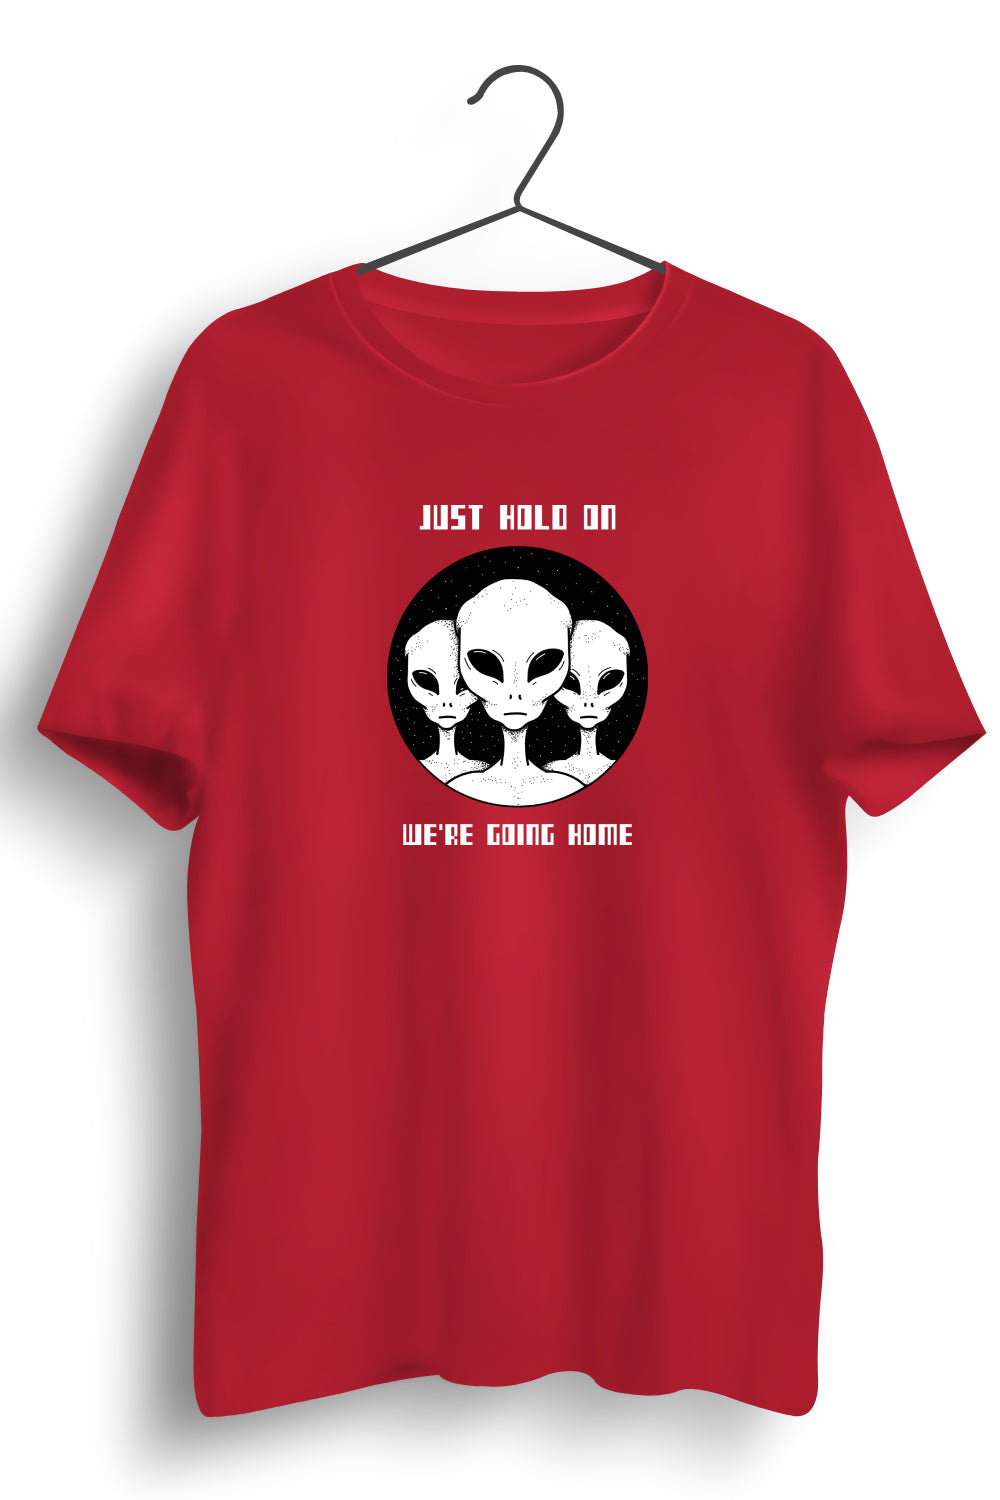 Going Home Graphic Printed Red Tshirt